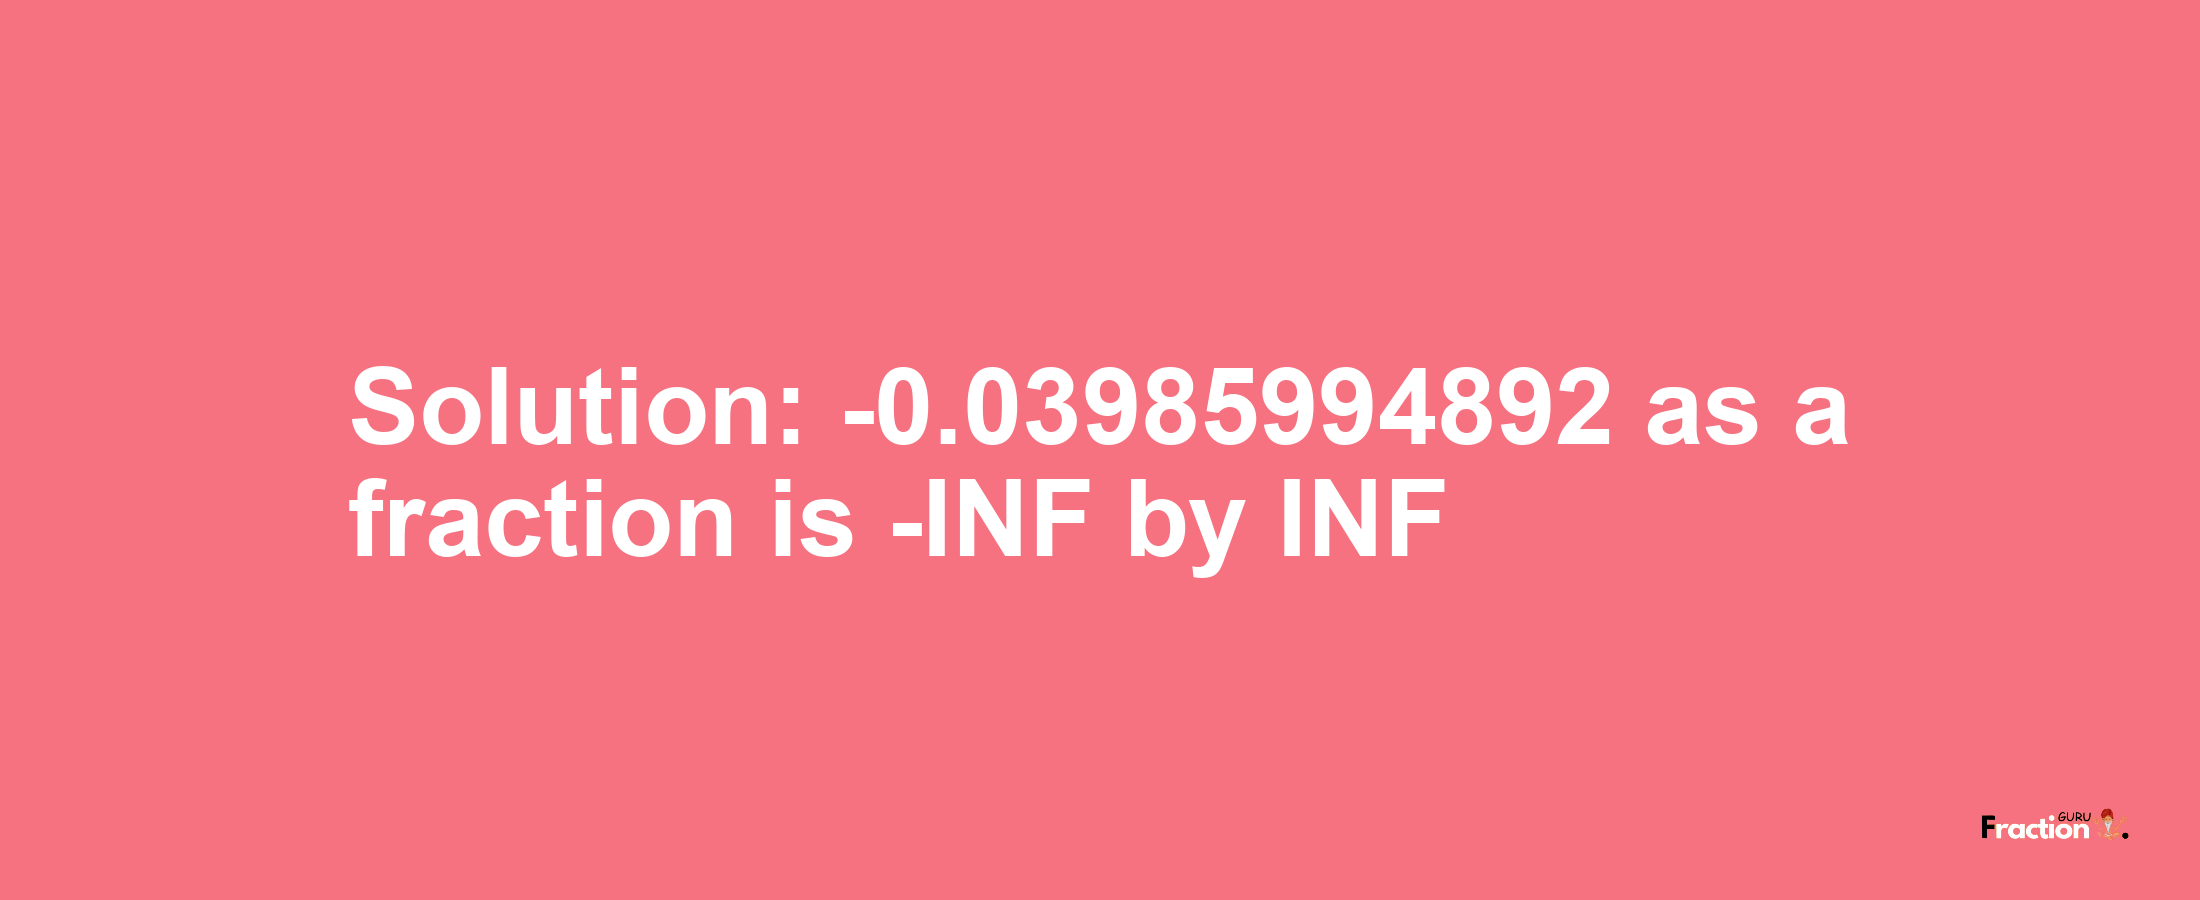 Solution:-0.03985994892 as a fraction is -INF/INF